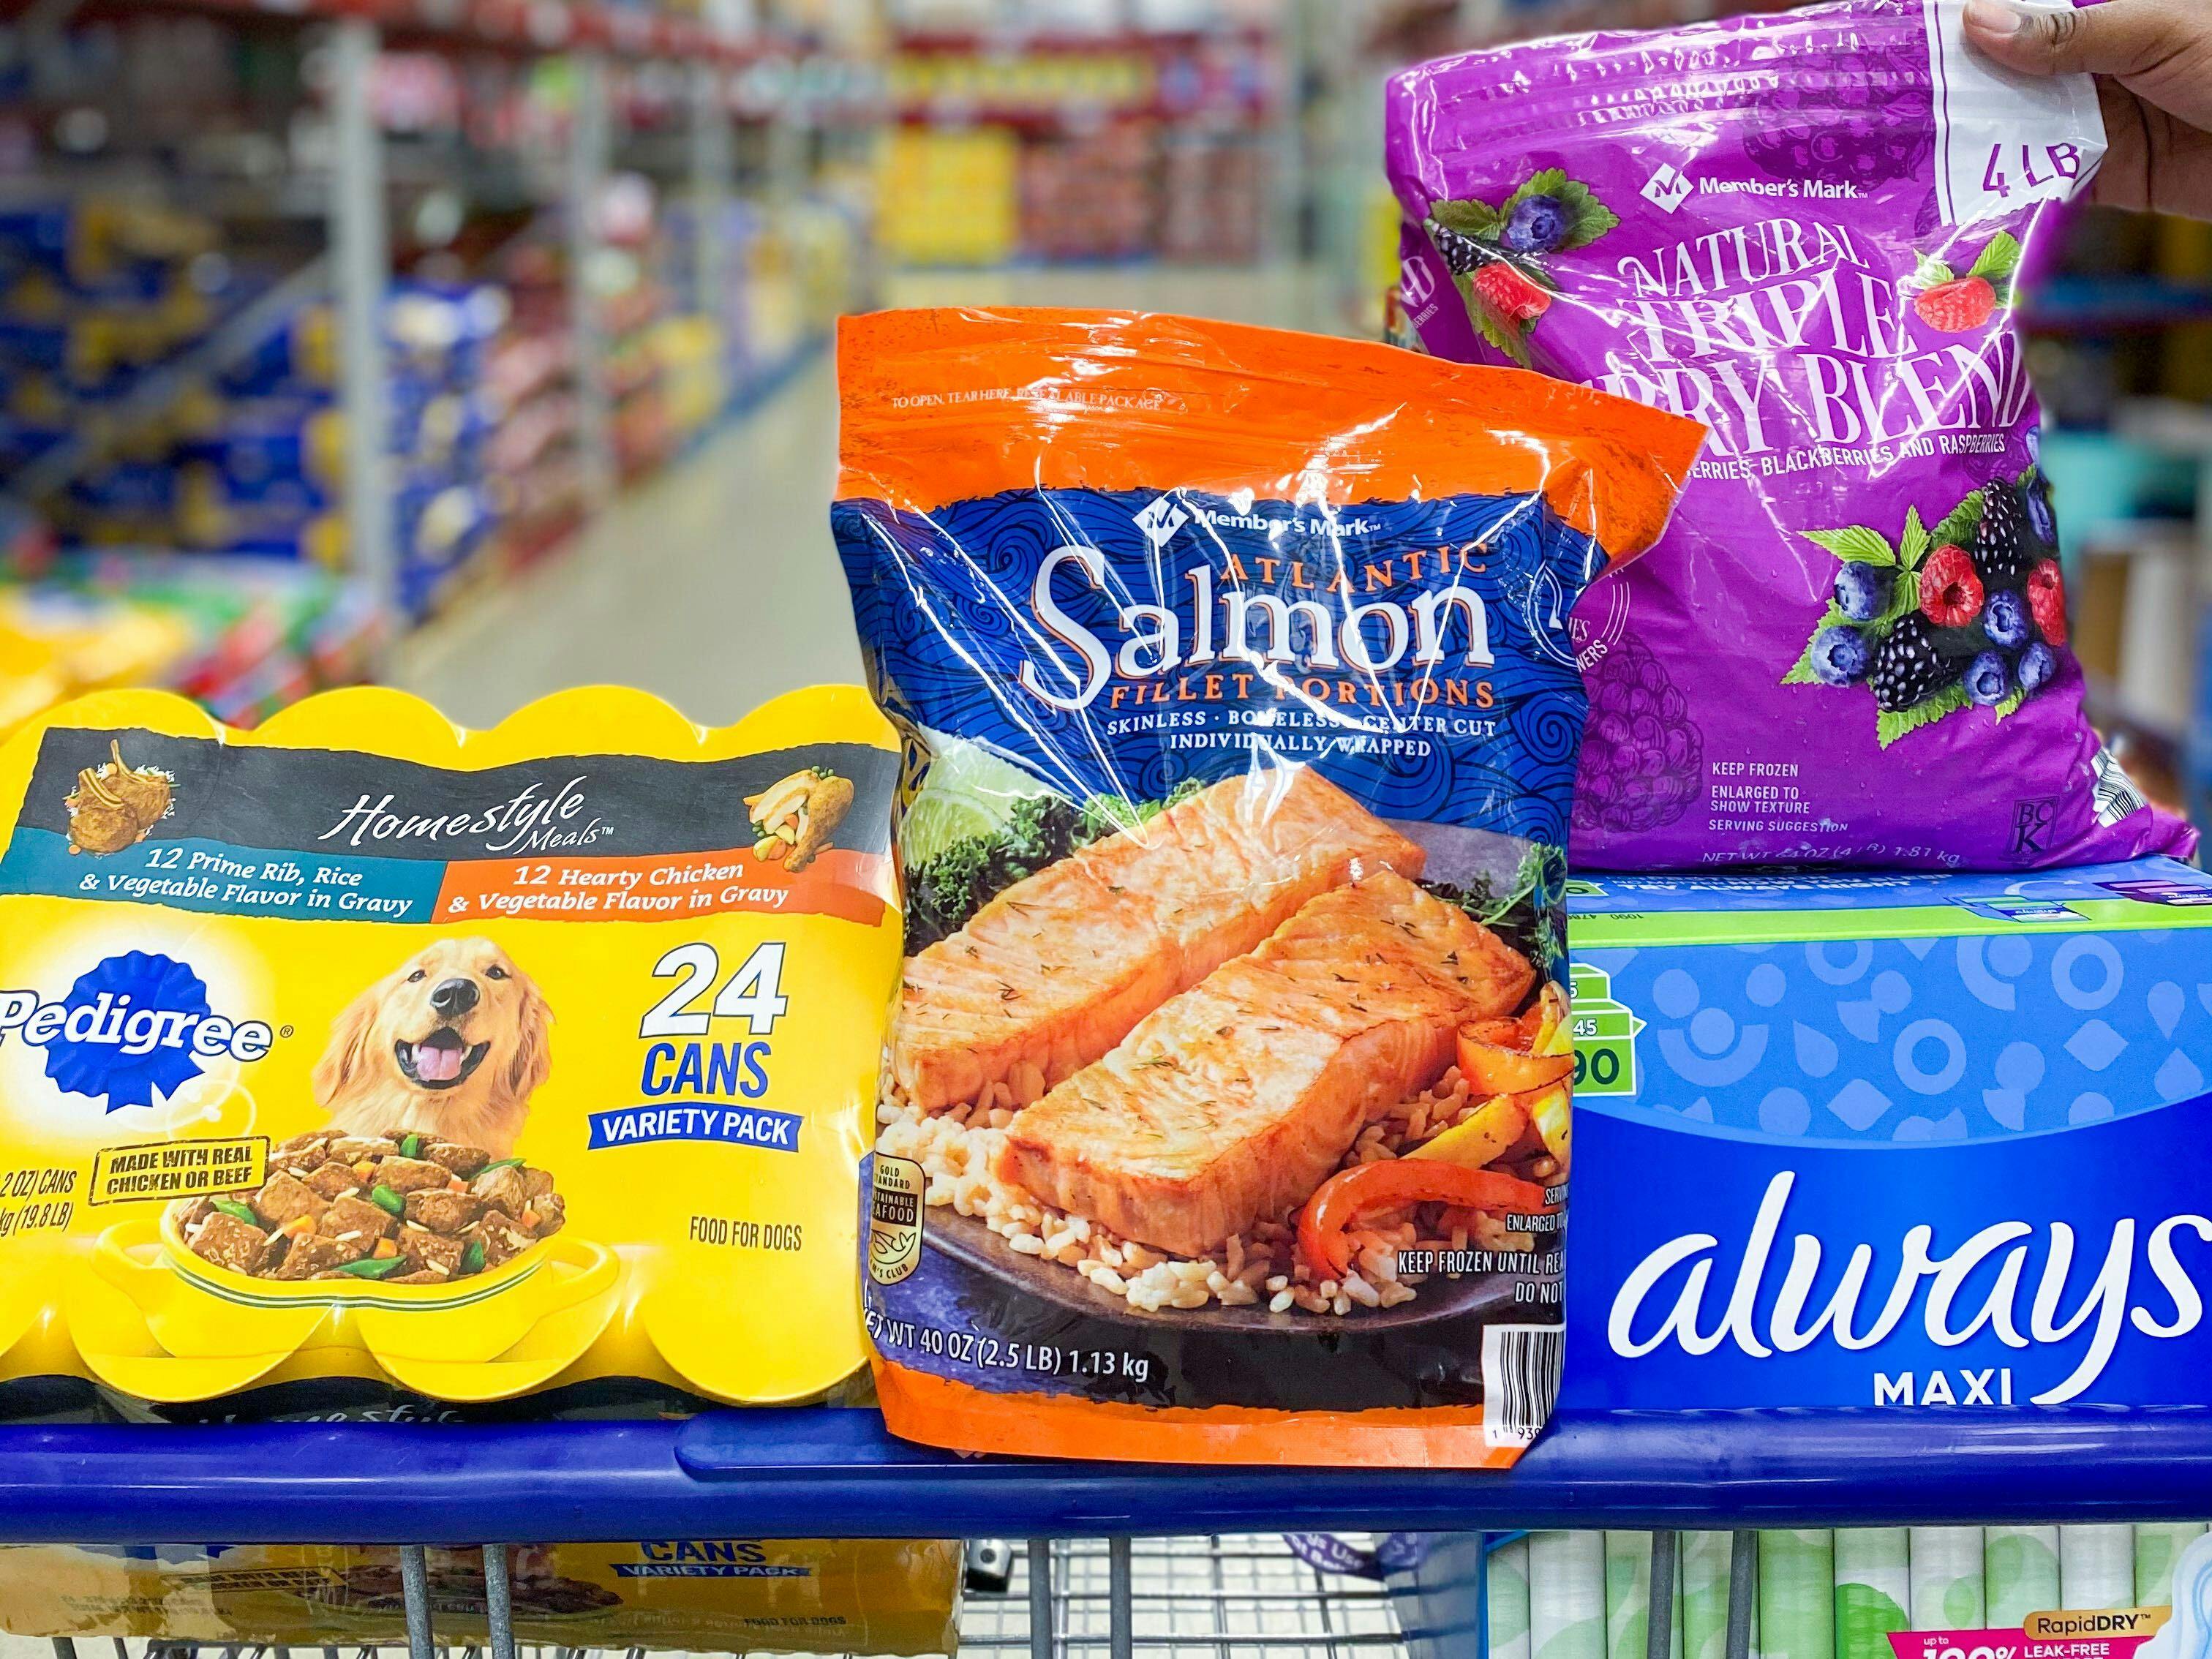 A Beginner's Guide To Food Shopping At Sam's Club